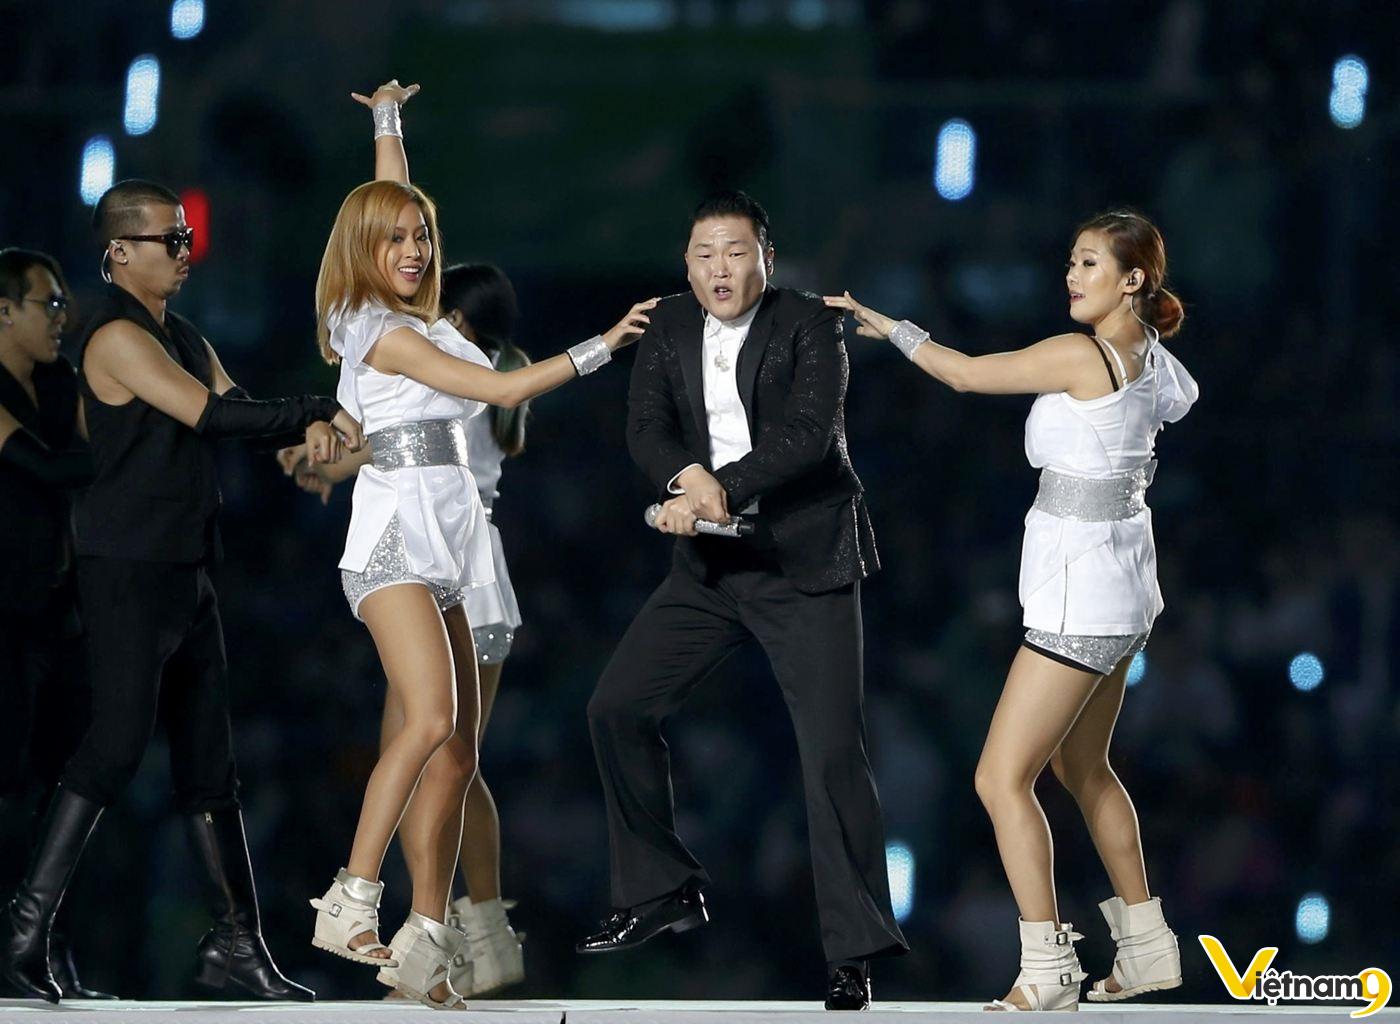 Asian Games 2014 - Vietnam9 - Psy's famous song Gangnam Style performed at the 2014 Asian Games opening ceremony